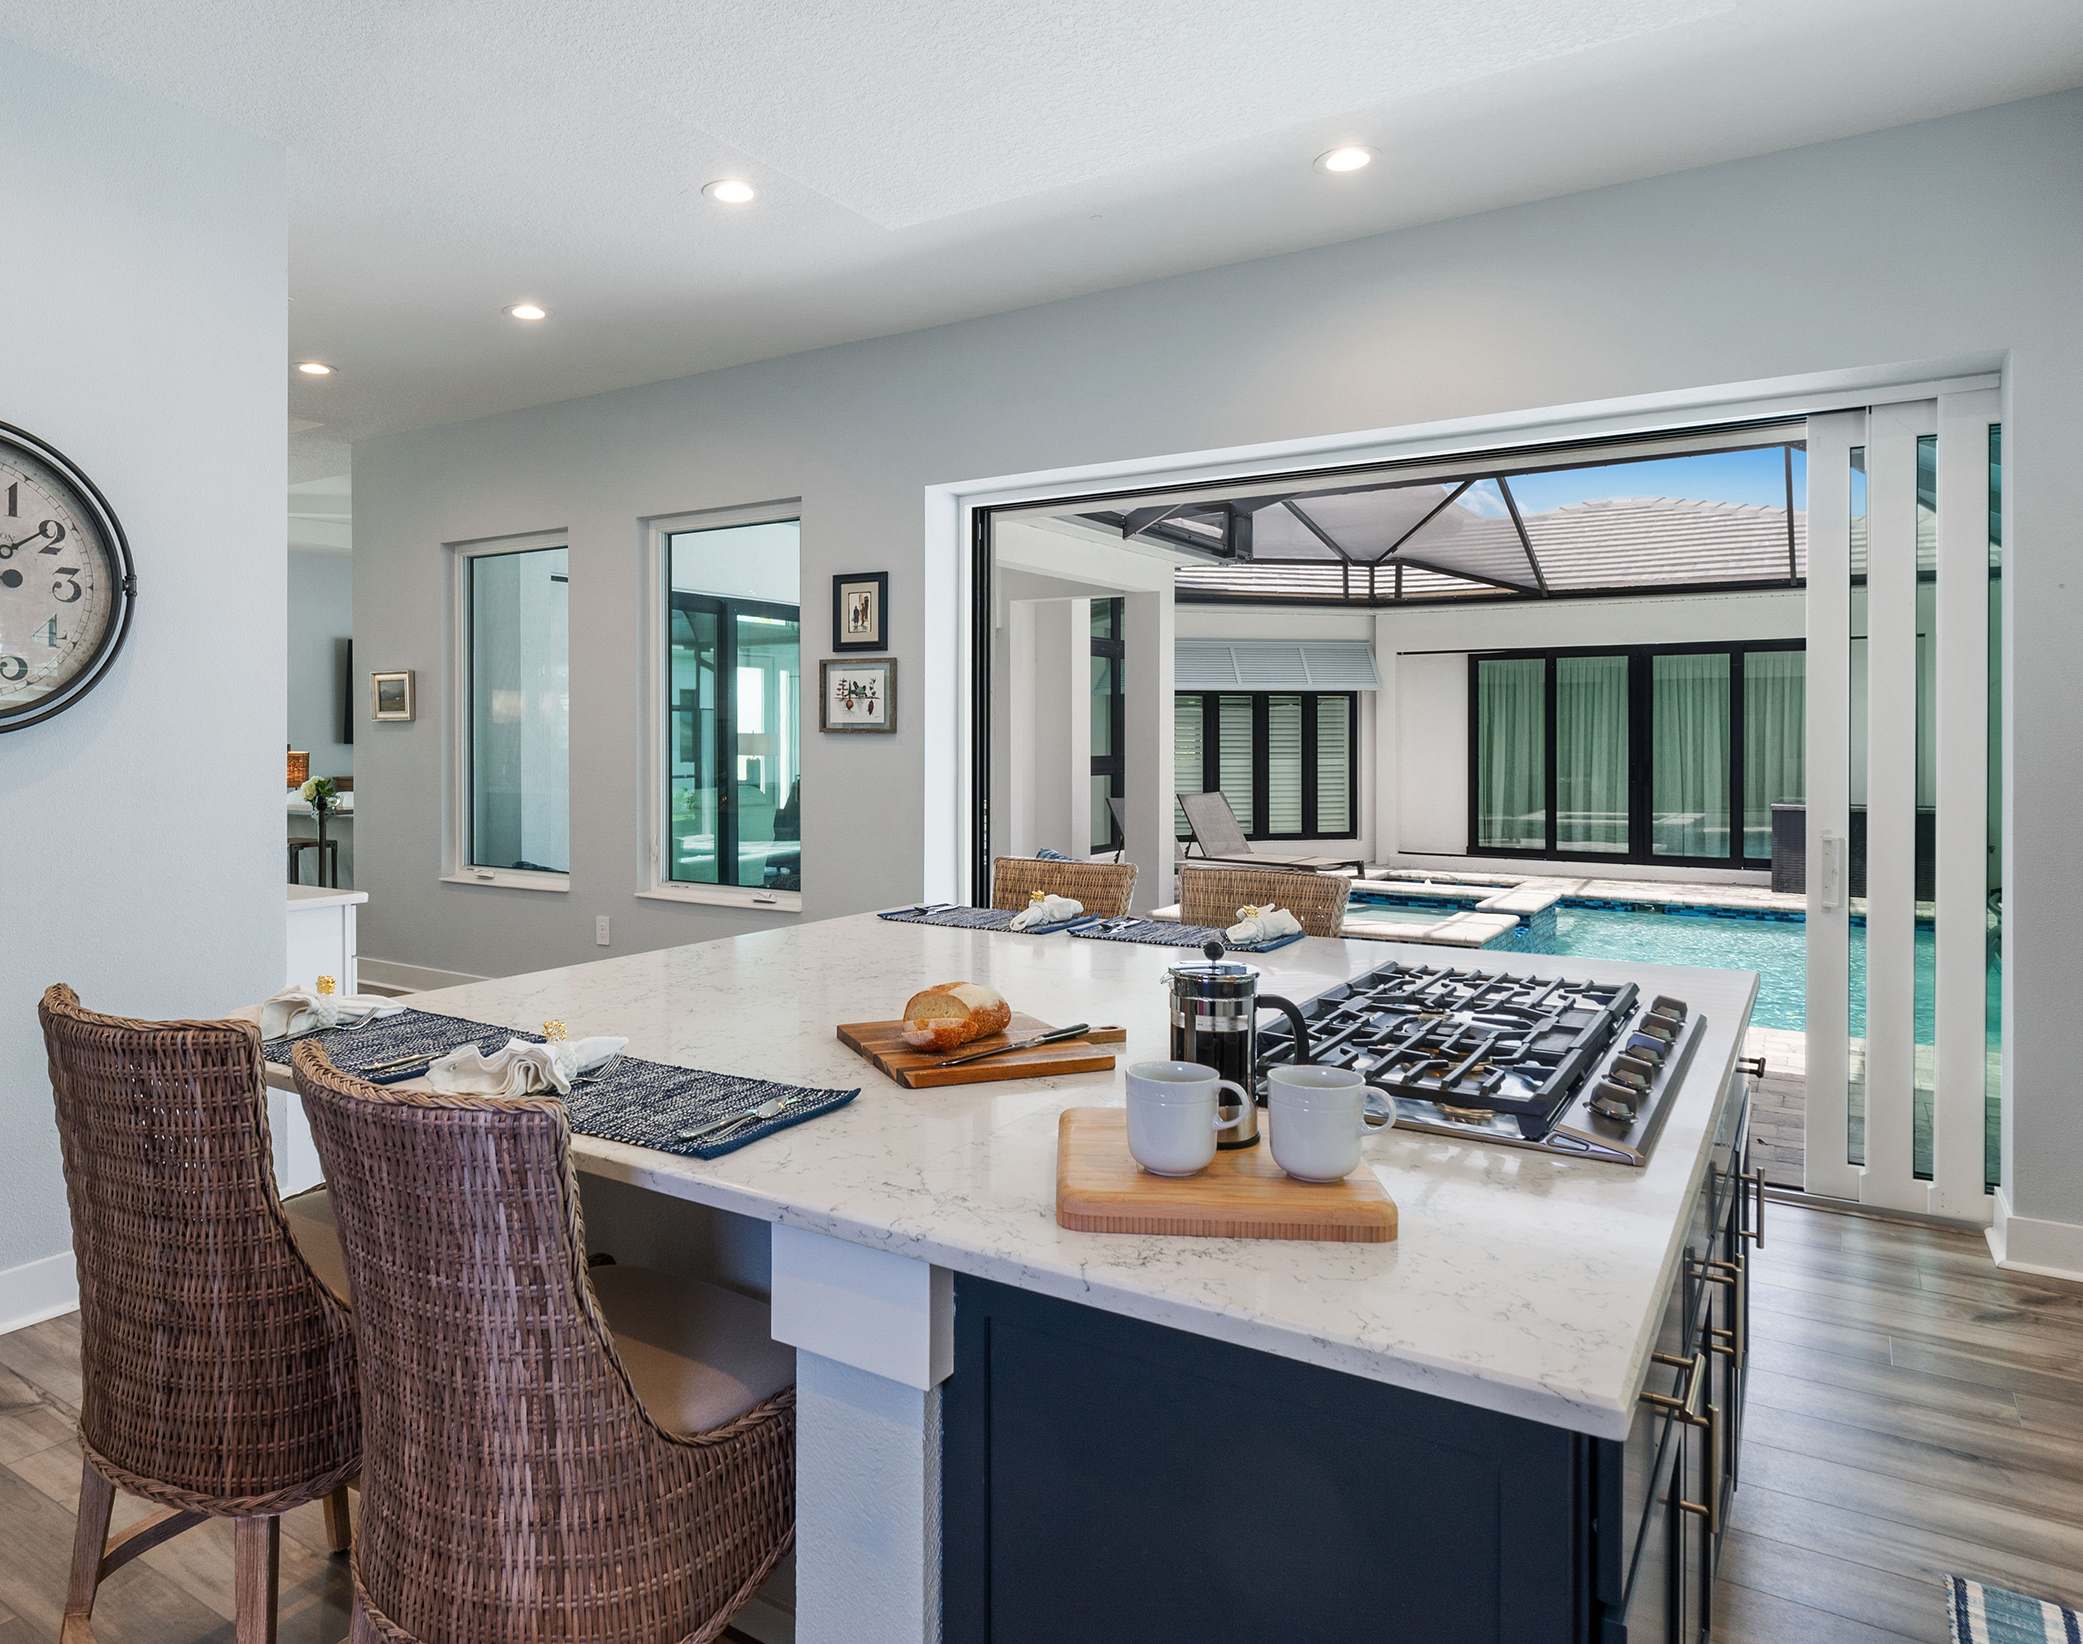 Deziner Tonie Interiors kitchen and island with built-in stove and seating looking out to lanai patio with pool in Loxahatchee Groves, FL.